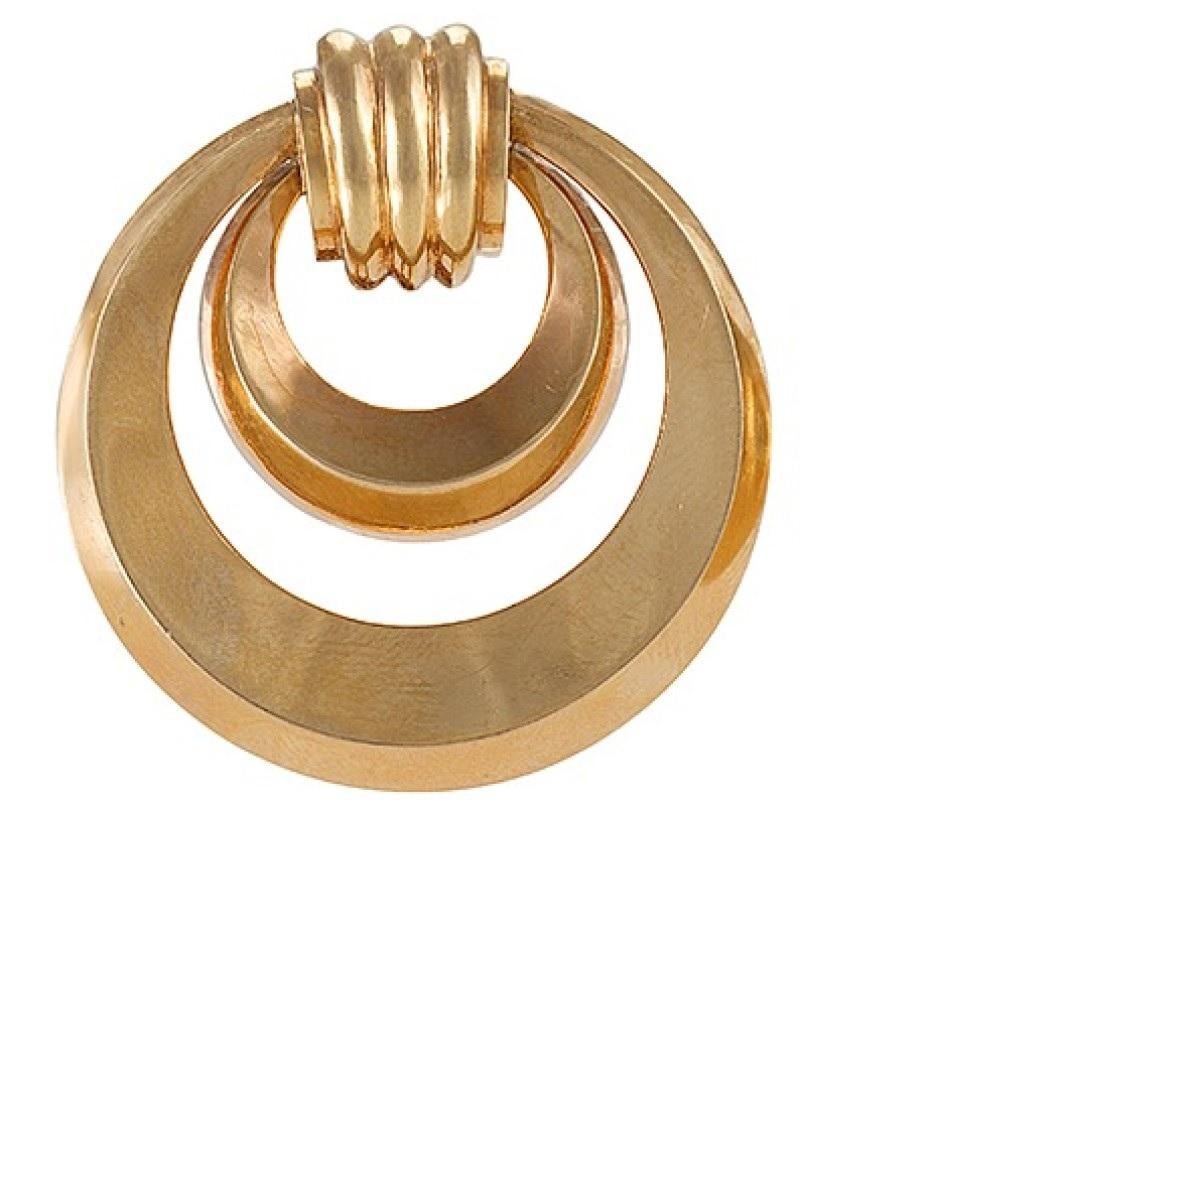 These Retro gold earrings reimagine the ever-popular hoop as two conjoined concentric circles that are highly three-dimensional in volume while remaining lightweight by design. A study in canted planes and voluminous arcs, these stylish double hoop